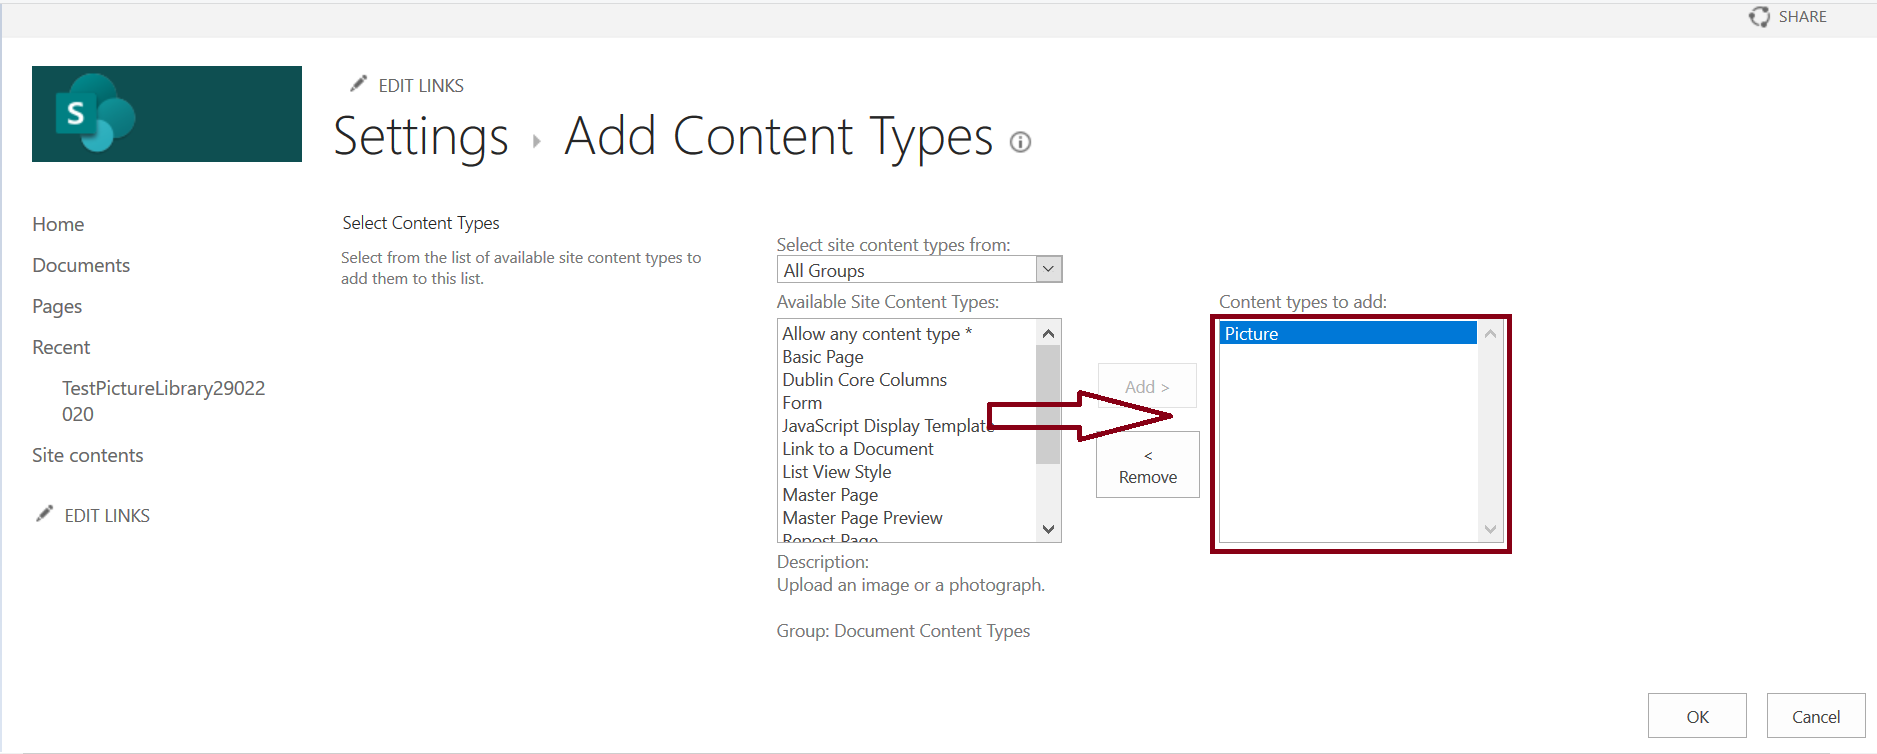 Add Content Types - Picture in Document Library